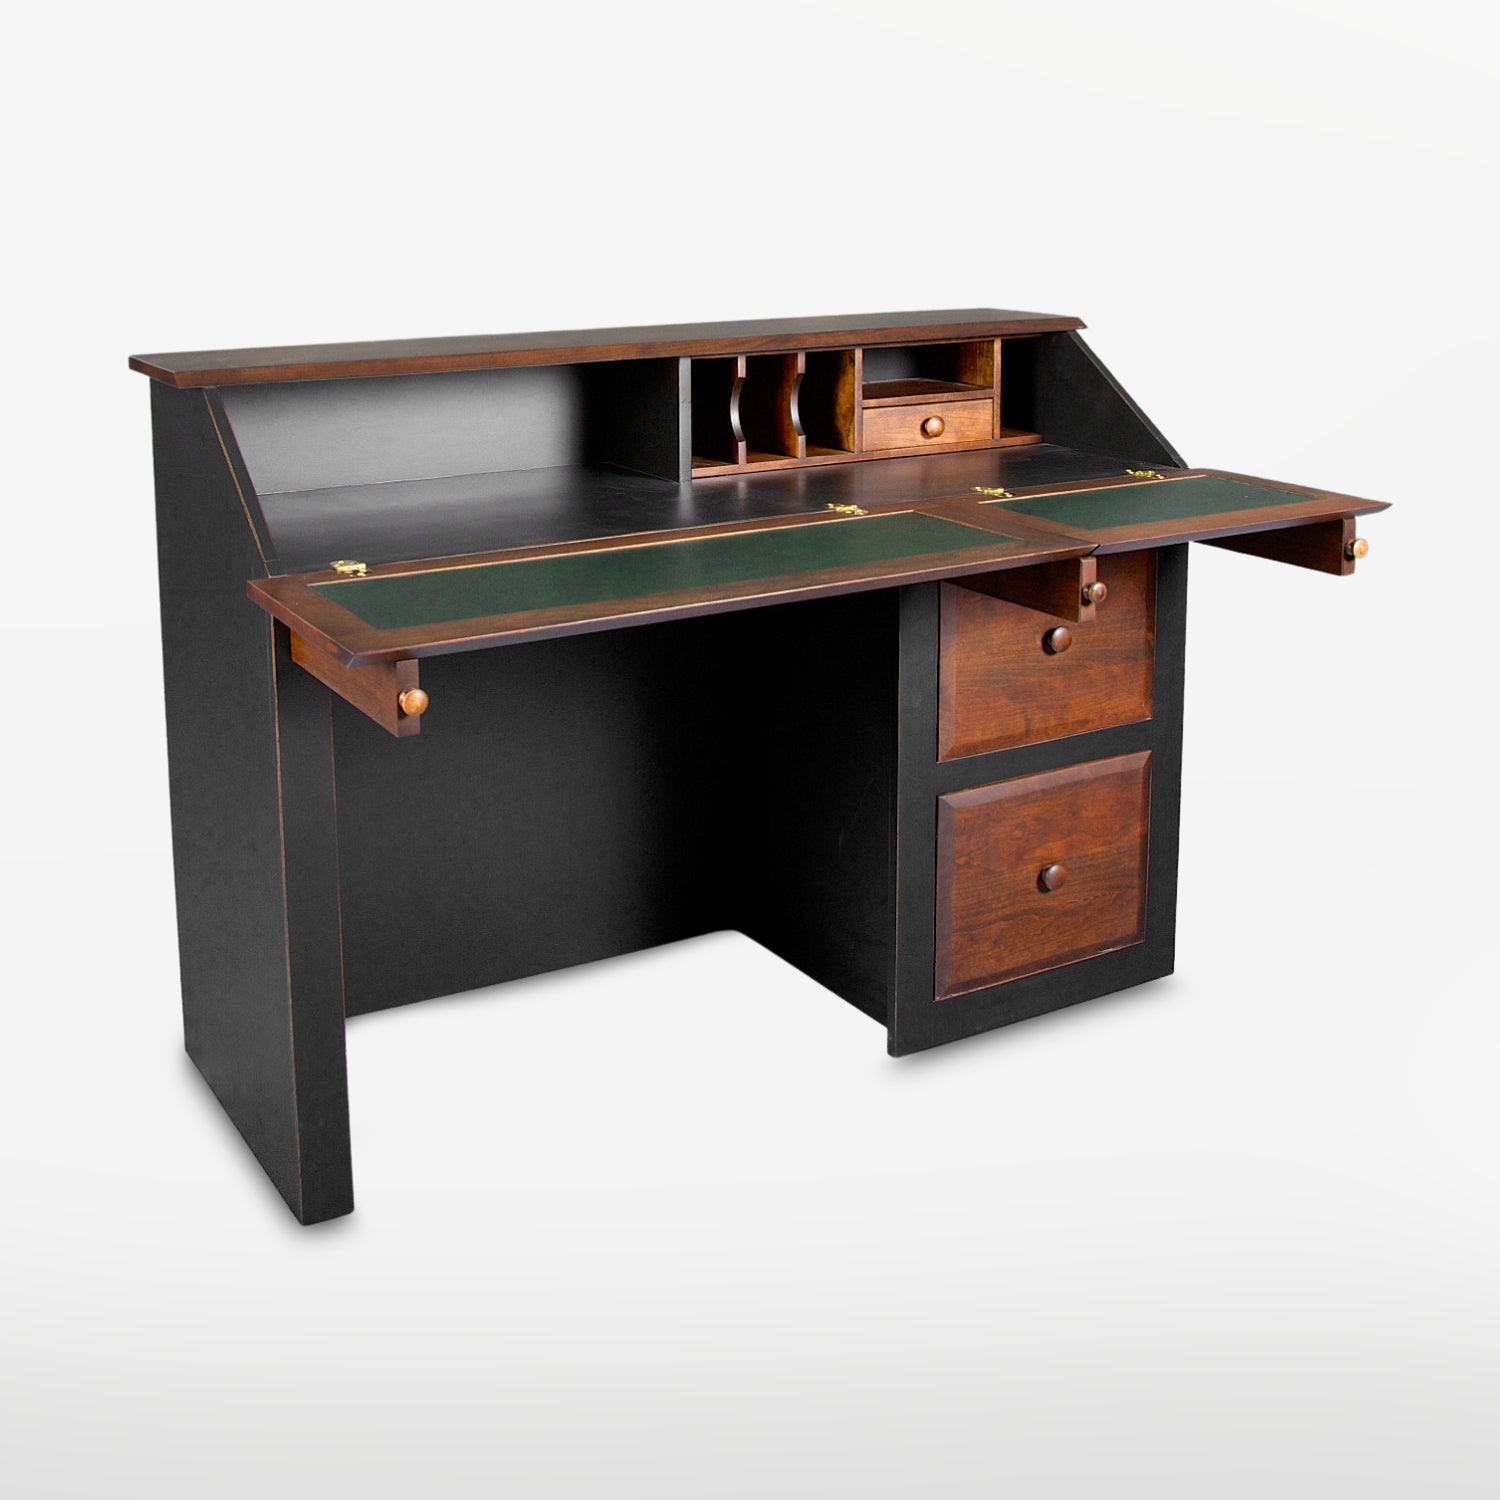 Flip Desk | Rustic Wood Desk with Drawers | Country Furniture